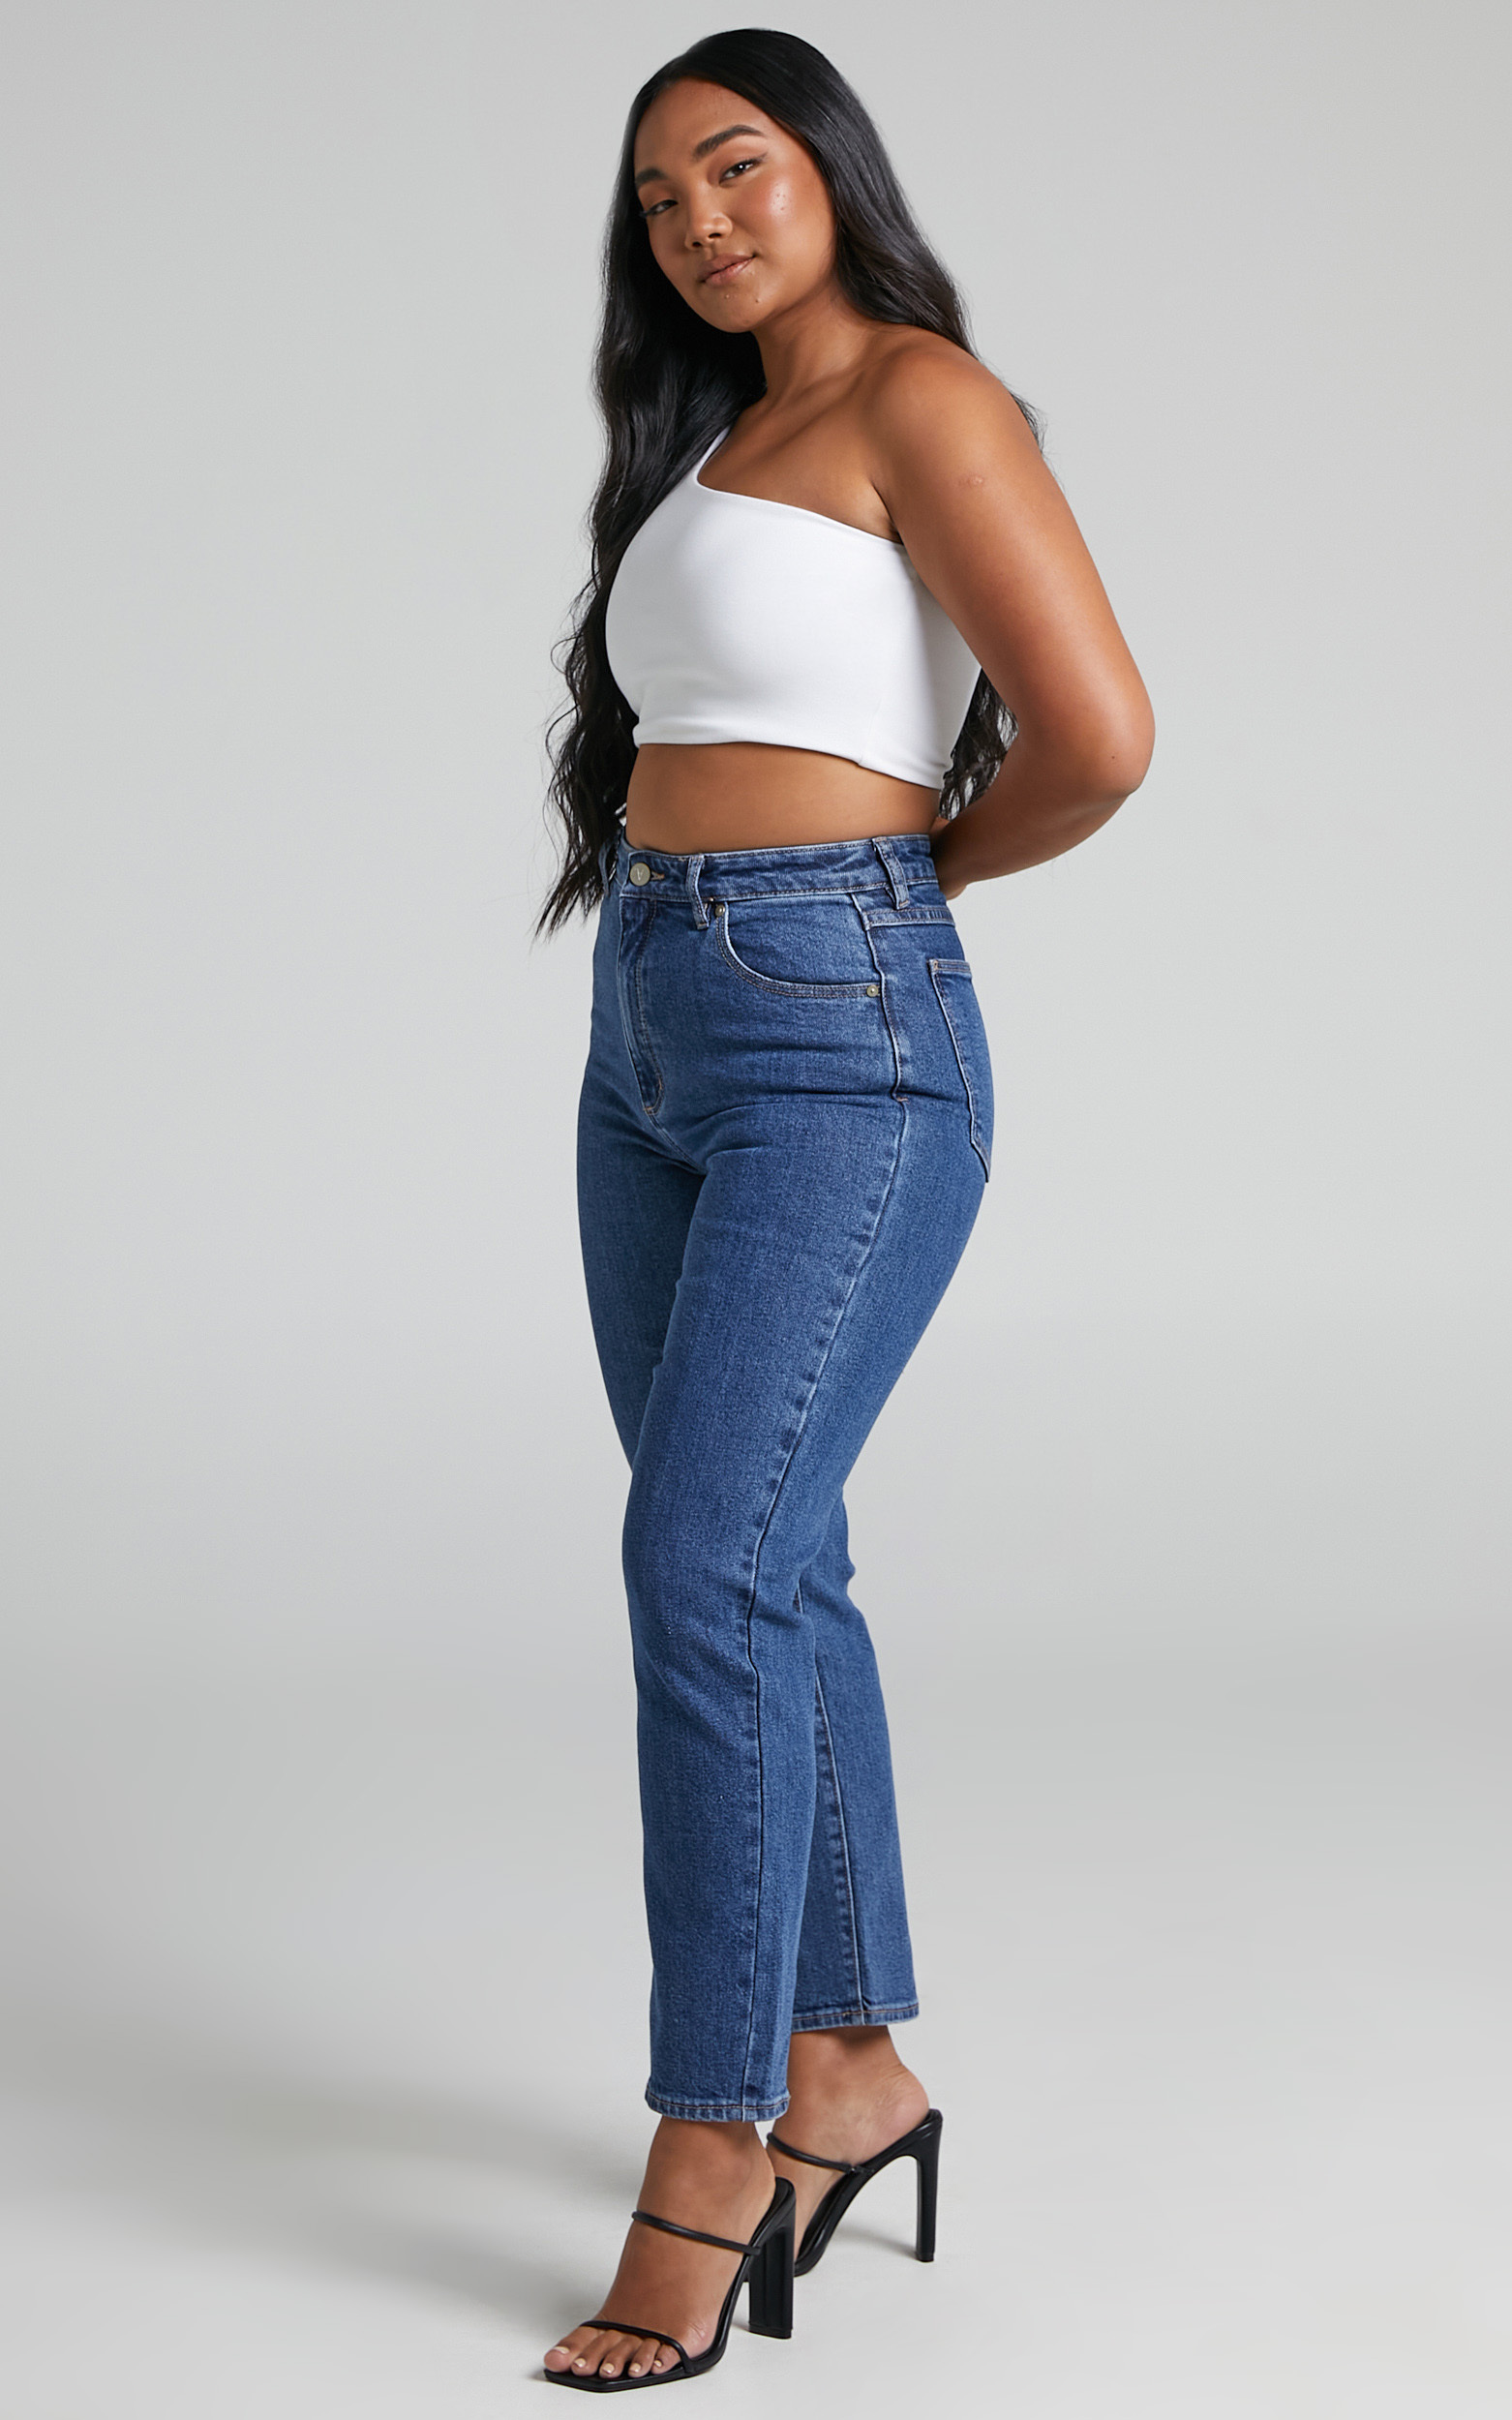 Abrand - A '94 High Slim Jean in Electra - 06, BLU1, hi-res image number null